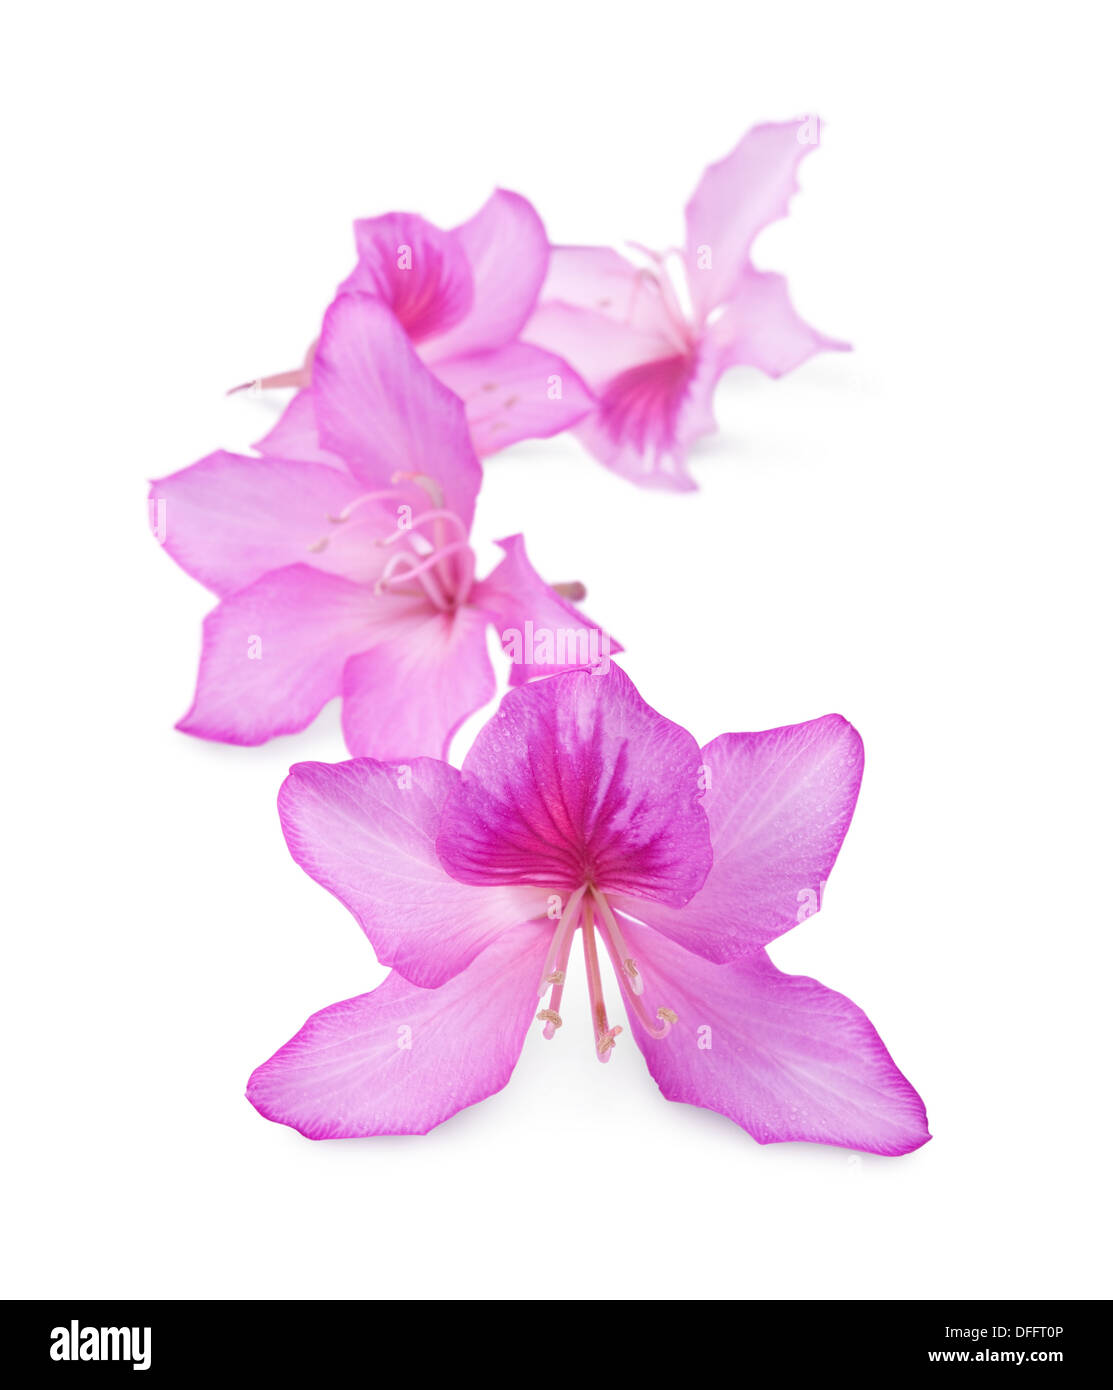 beautiful pink flowers isolated over white background Stock Photo